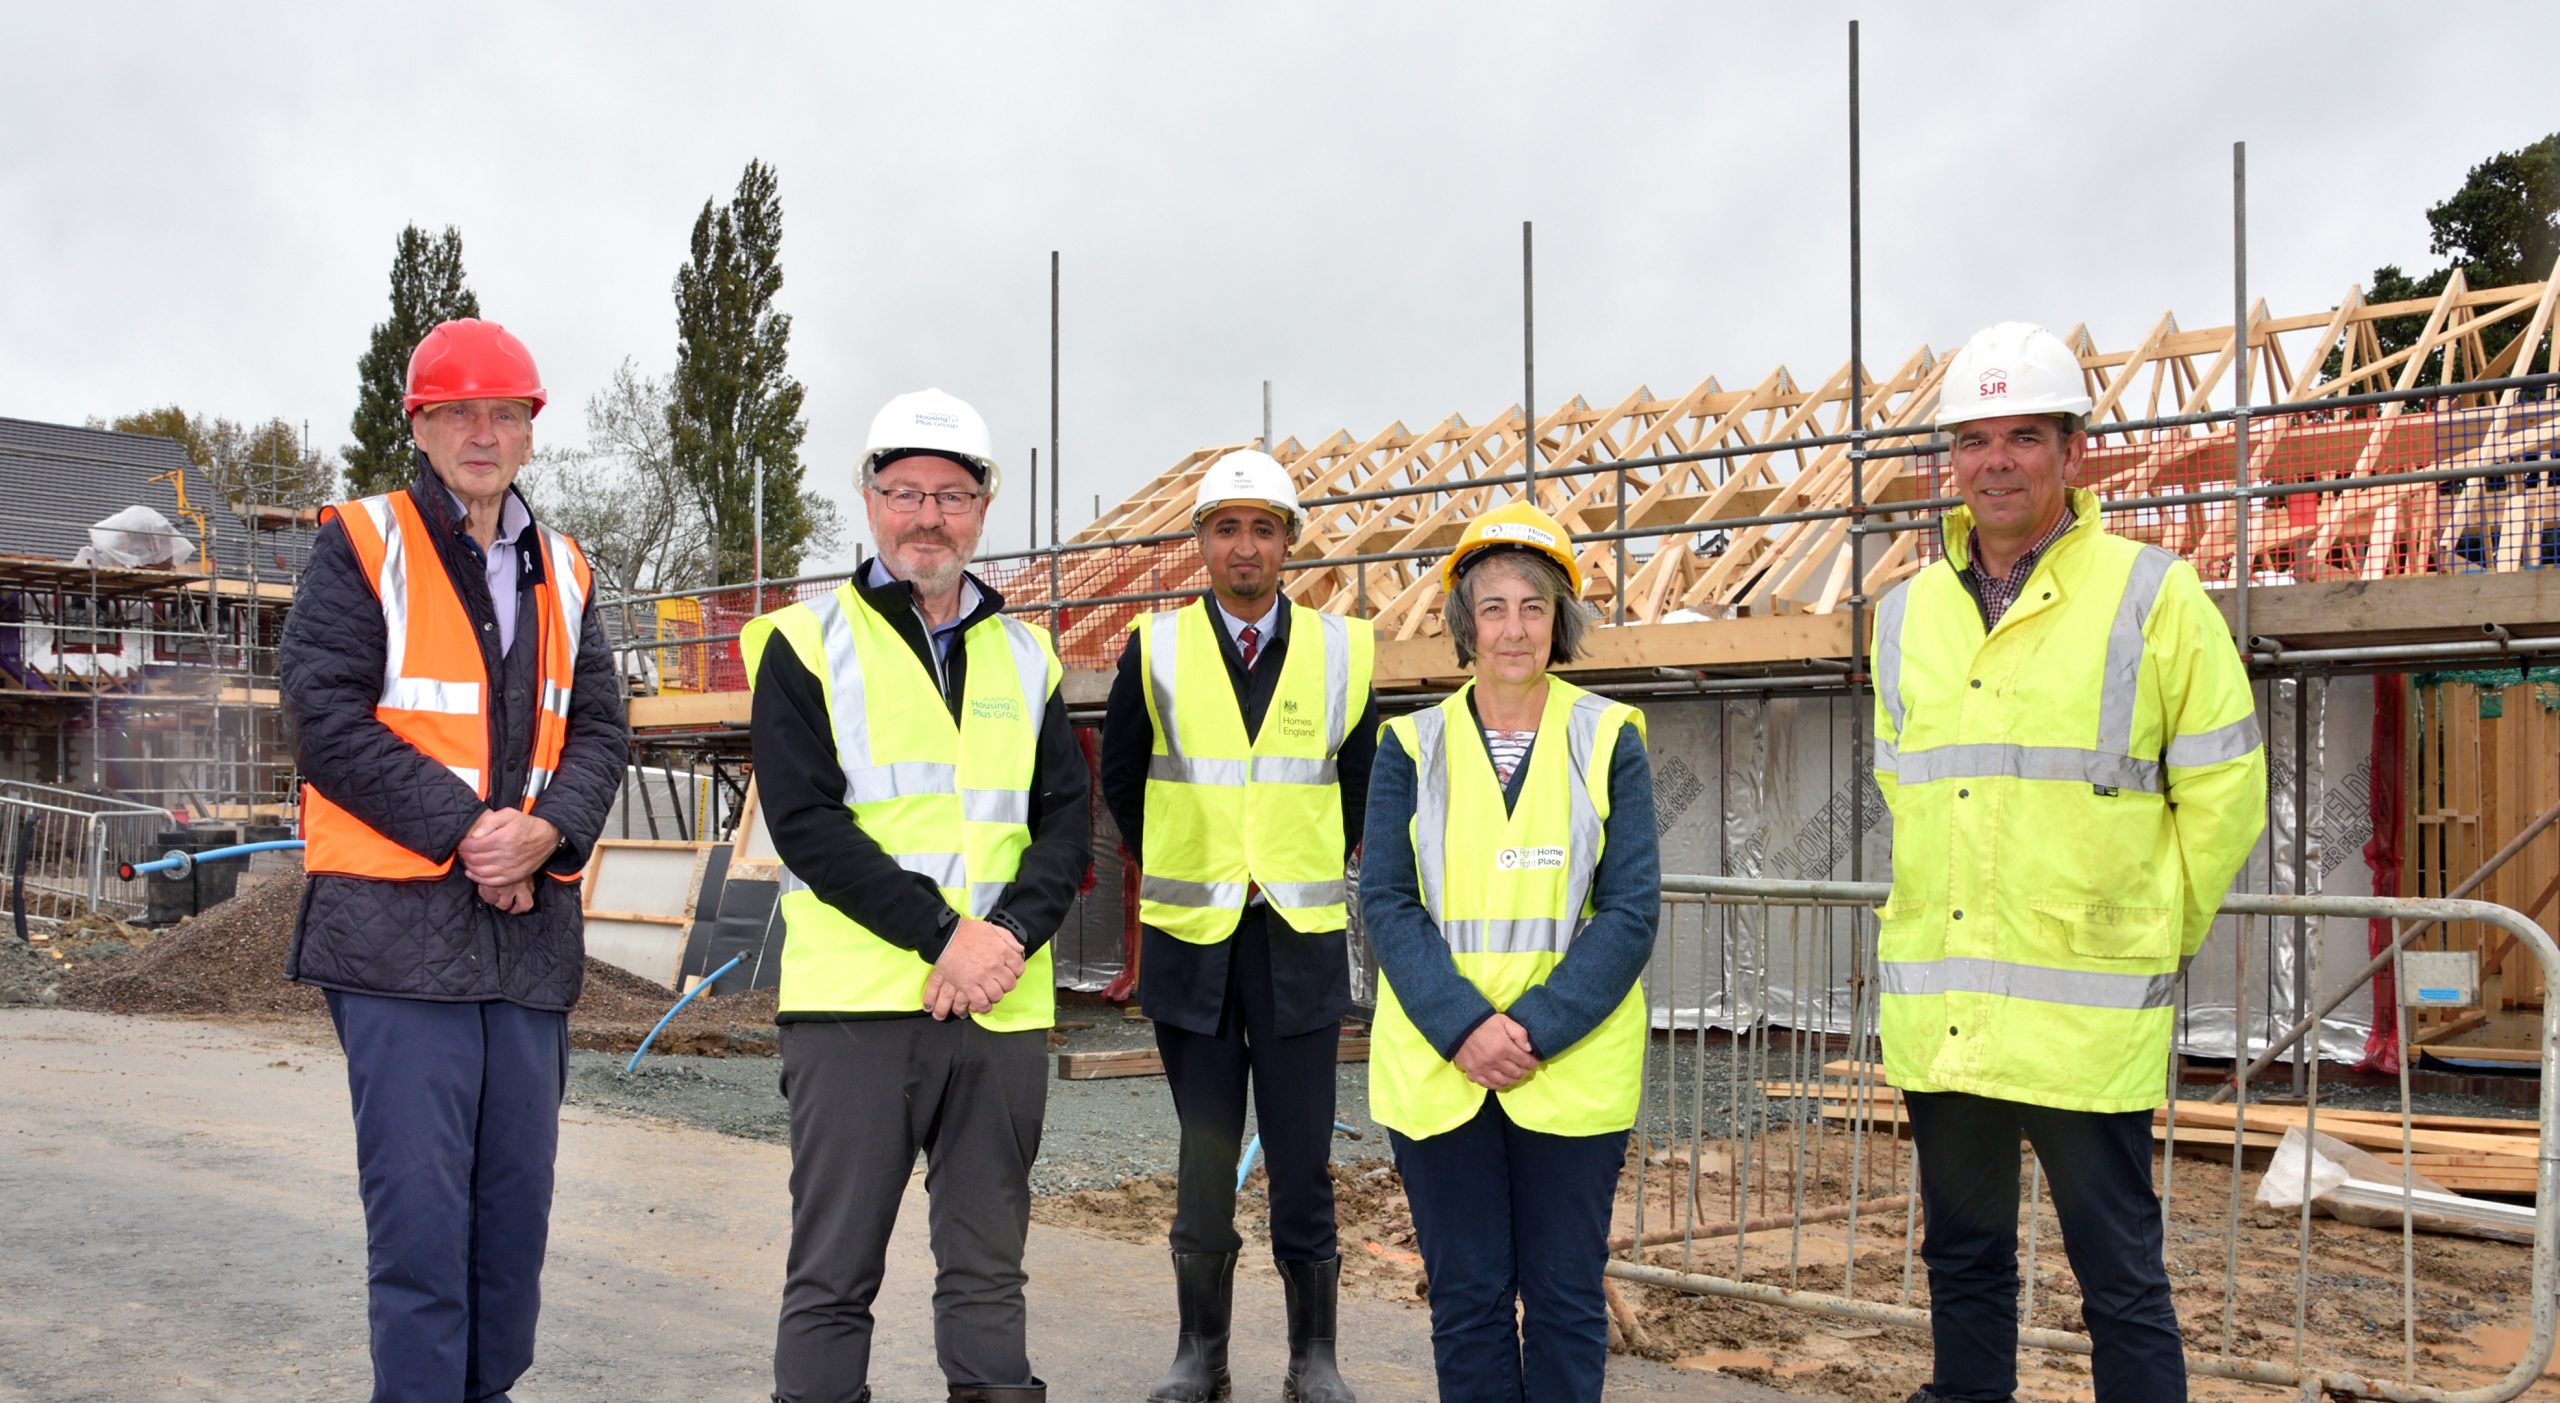 Representatives from Housing Plus Group joined Shropshire Council, Homes England and Pontesbury Parish Council for a recent site visit.